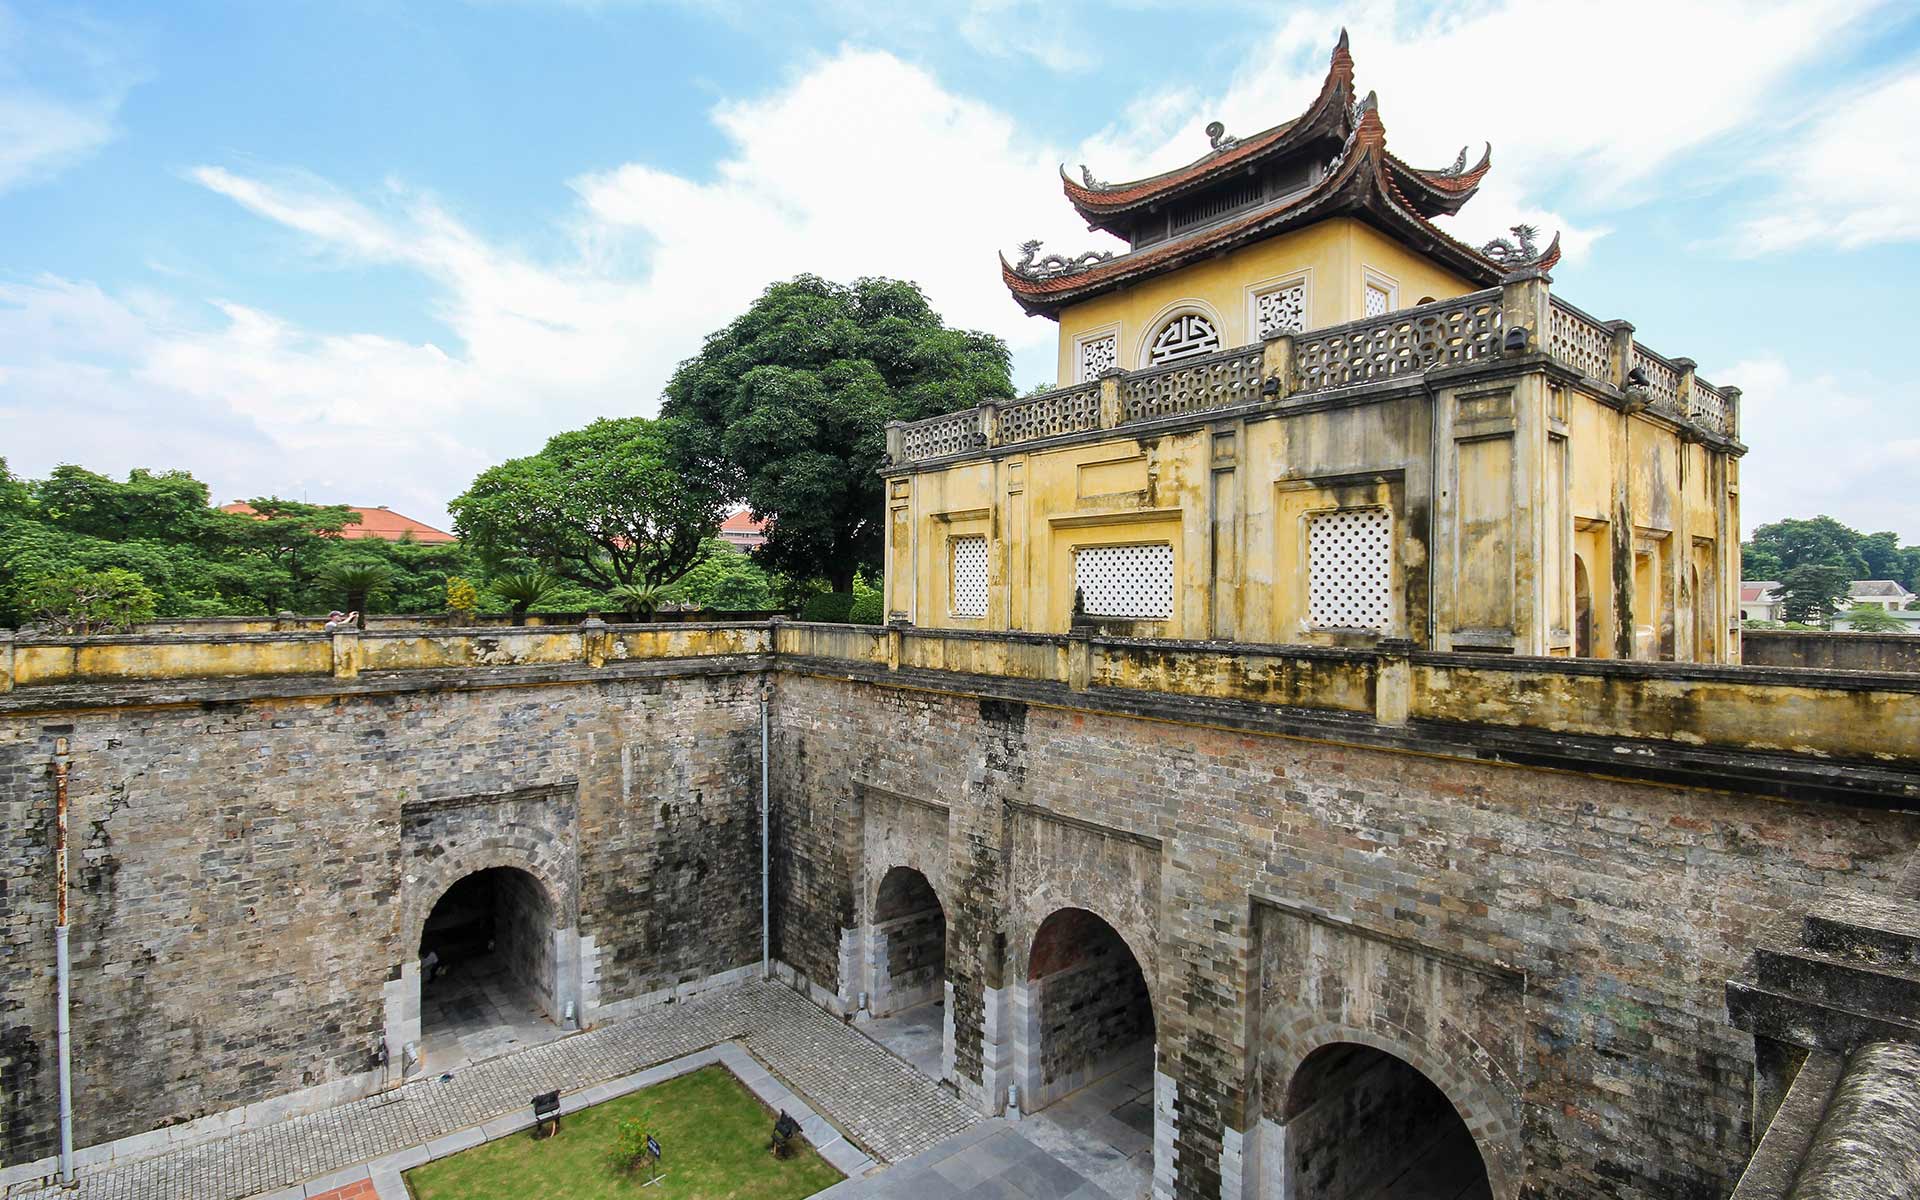 Visiting Imperial Citadel of Thang Long, Hanoi is the most favorite thing to do in Vietnam